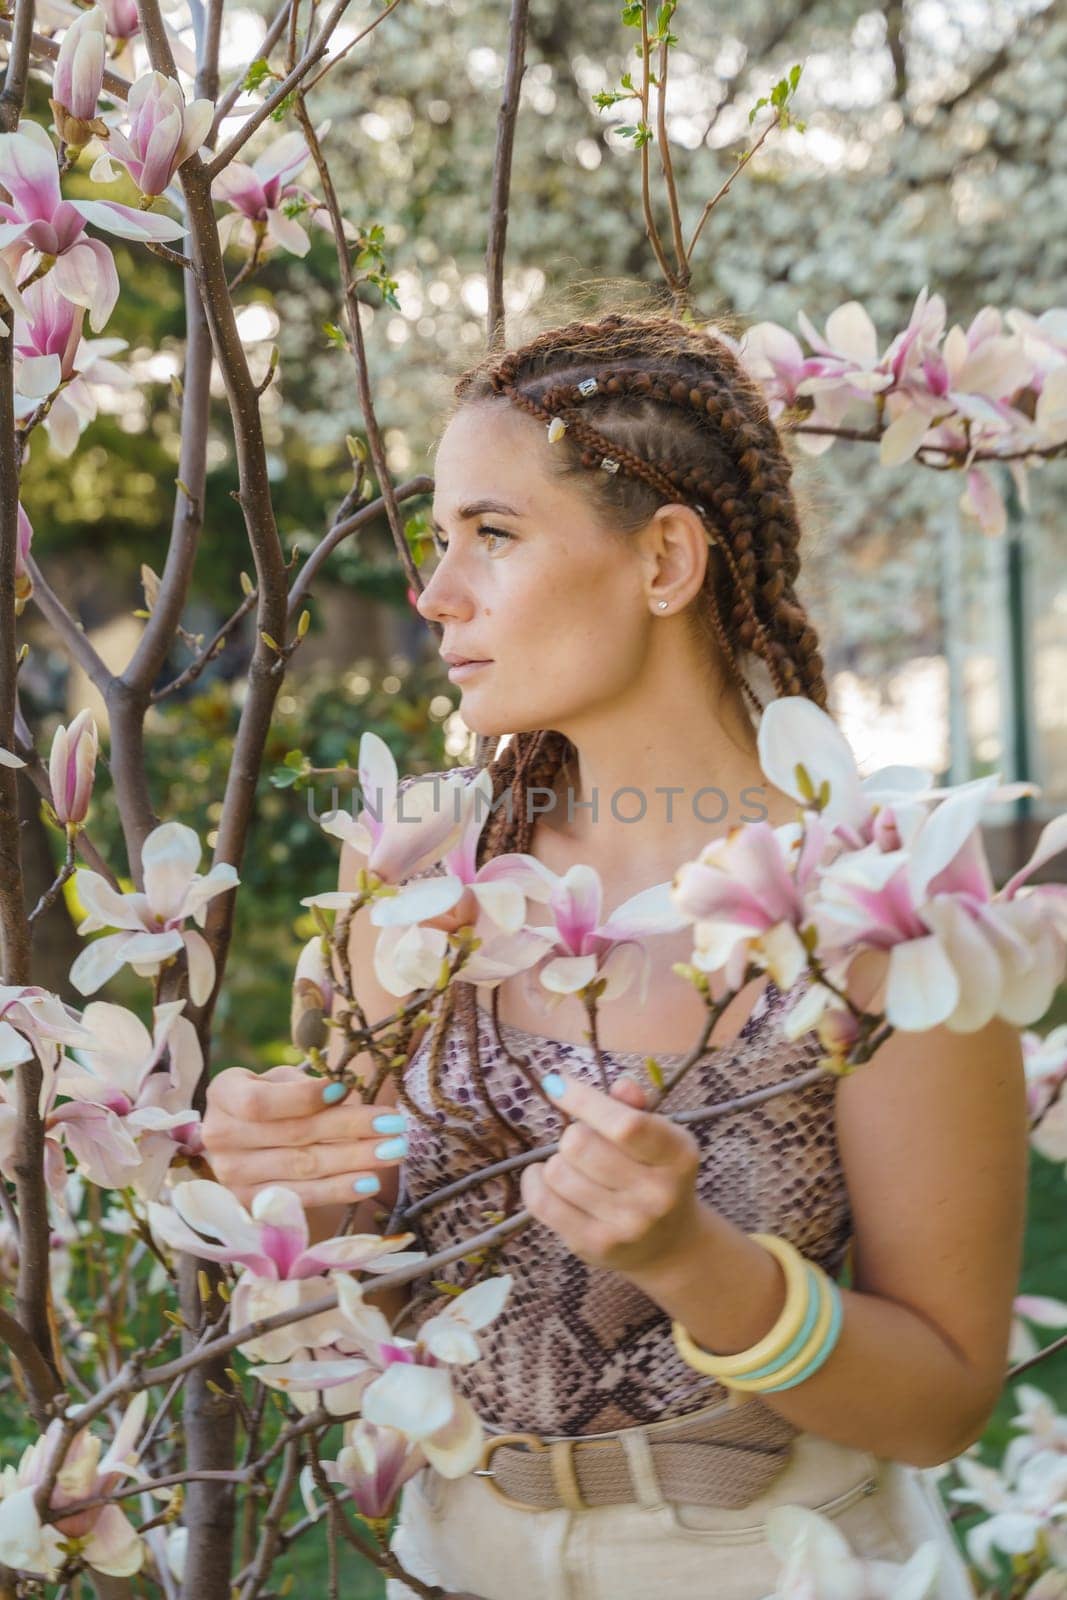 Magnolia flowers. Happy woman enjoys by blooming magnolia tree and sniffs it flowers with closed eyes in spring garden. Portrait